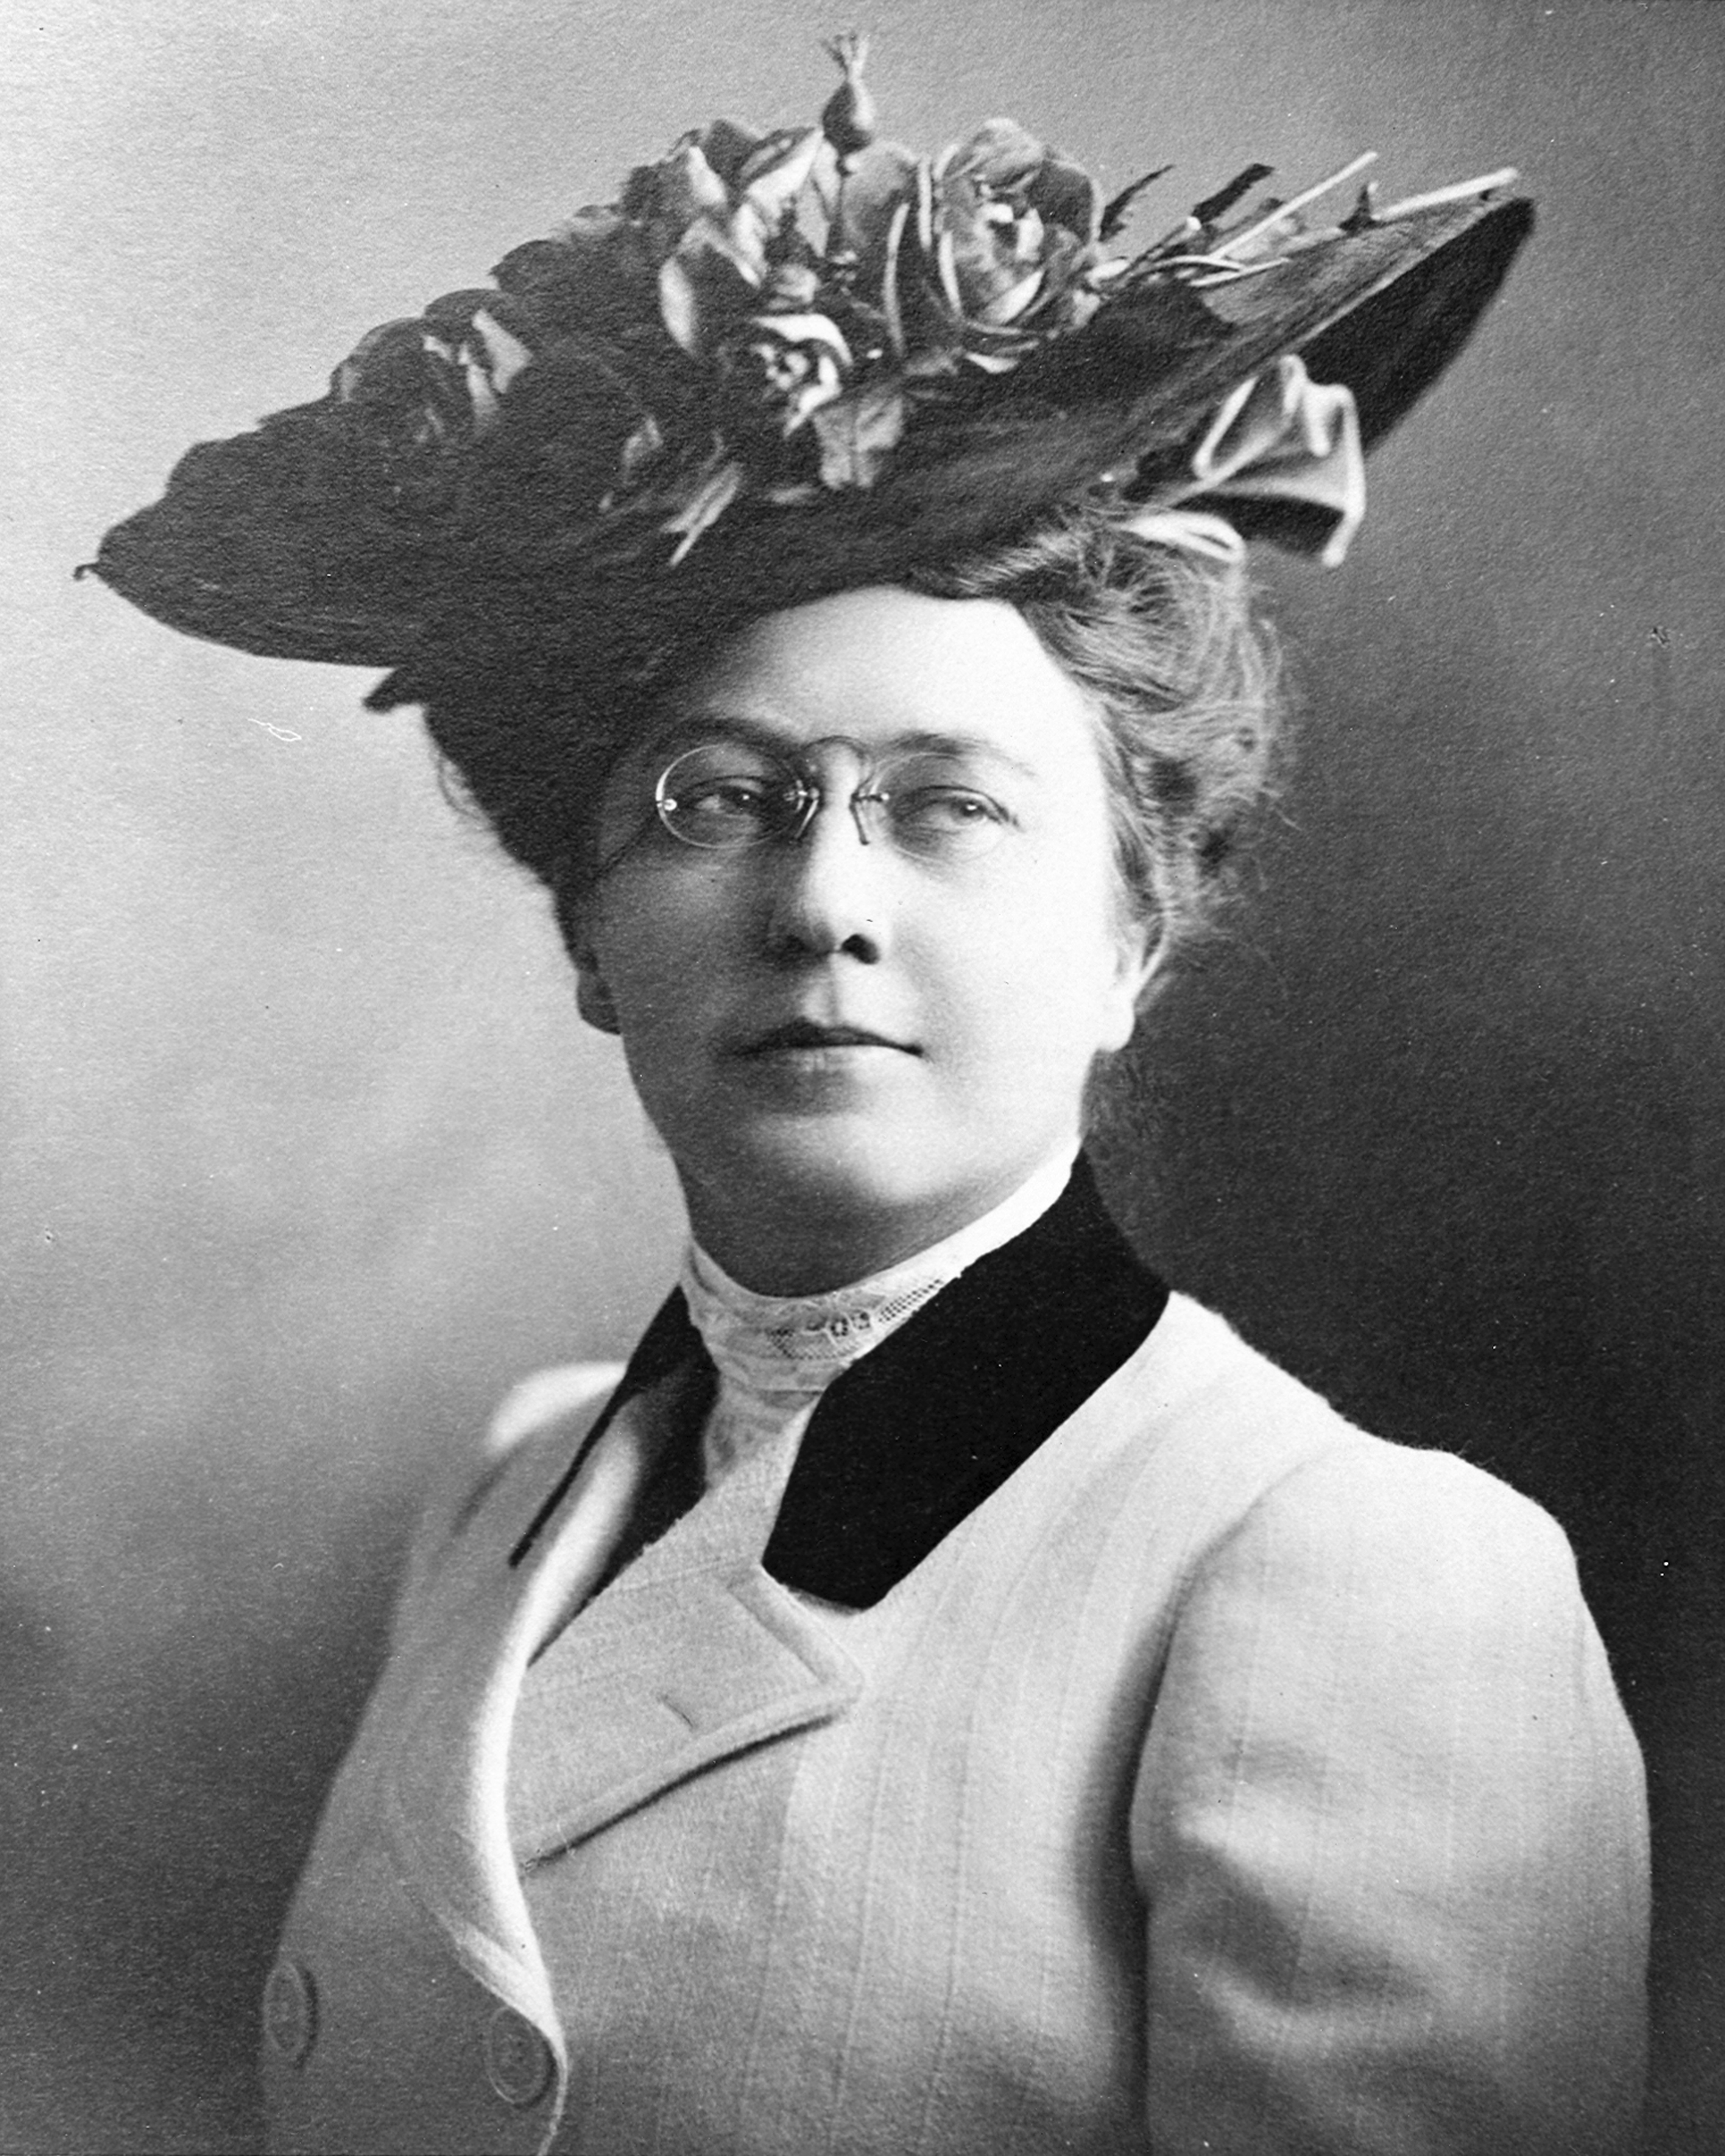 Woman facing camera, close-up portrait in black and white, with a large hat and glasses, wearing a white double breasted coat